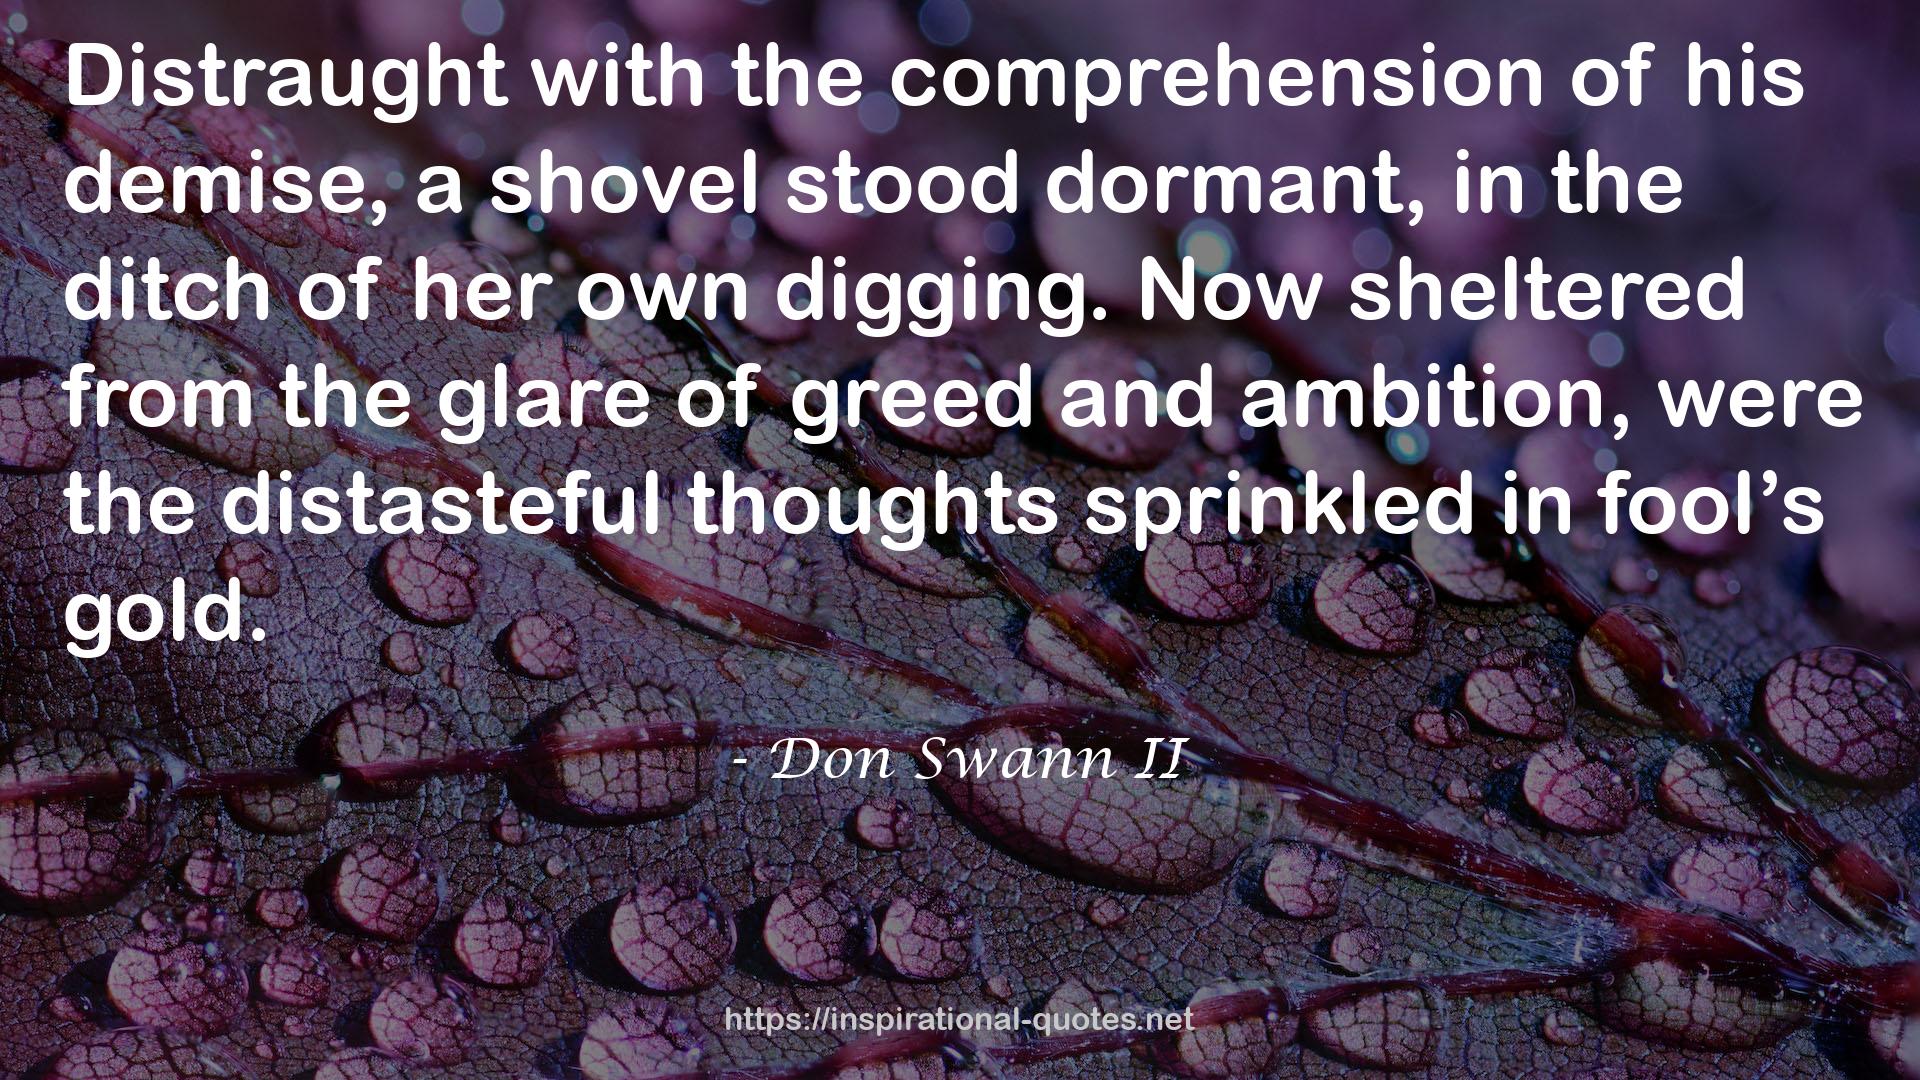 Don Swann II QUOTES